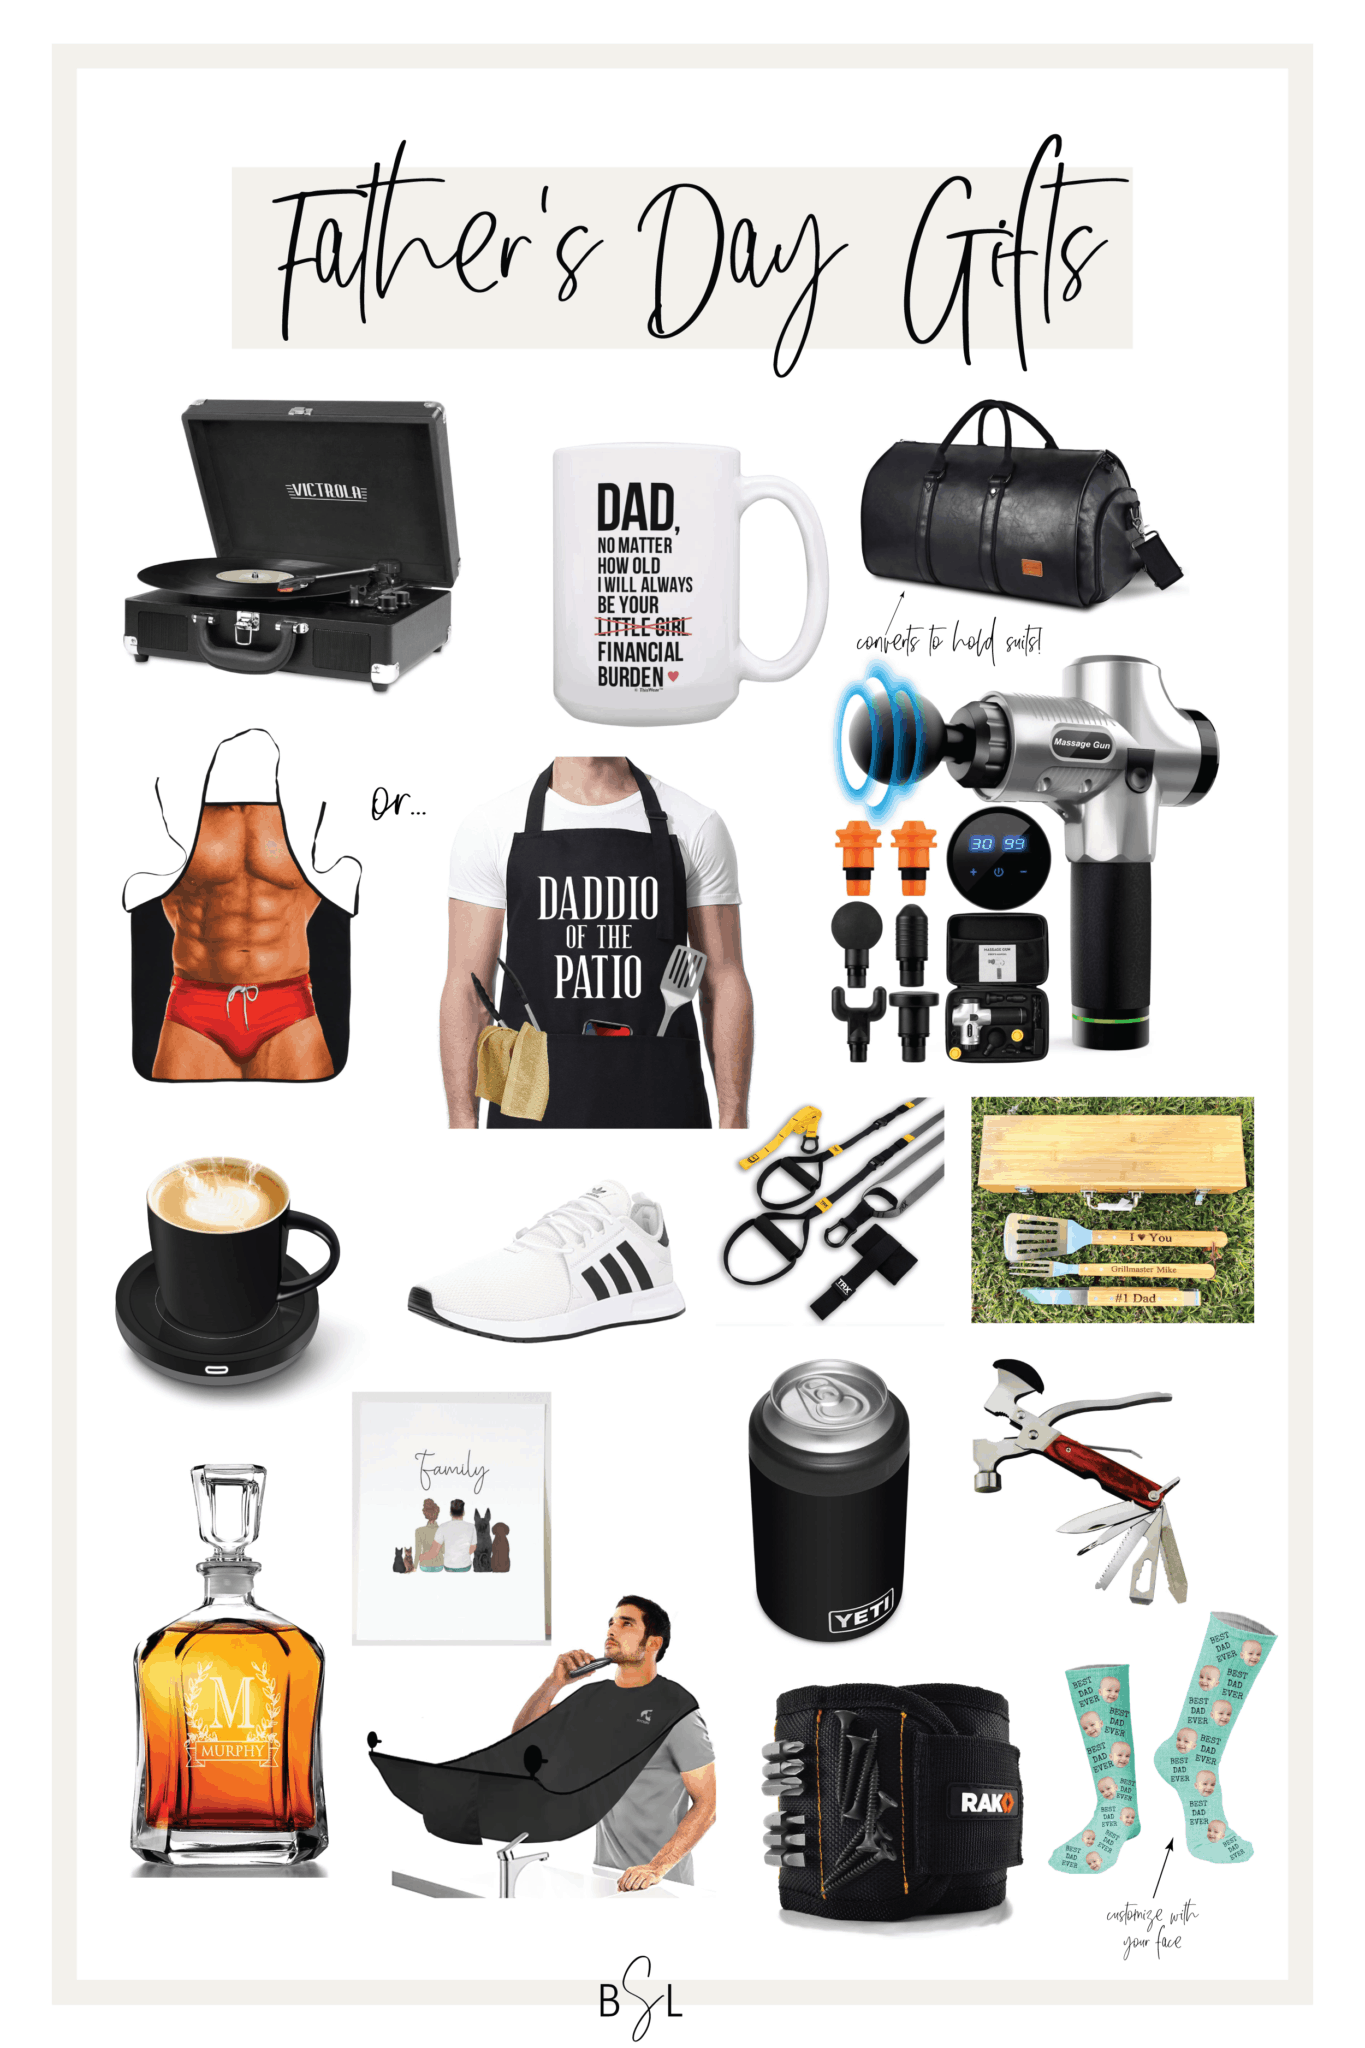 Fathers Day Gifts Your Dad Is Guaranteed To Love By Sophia Lee